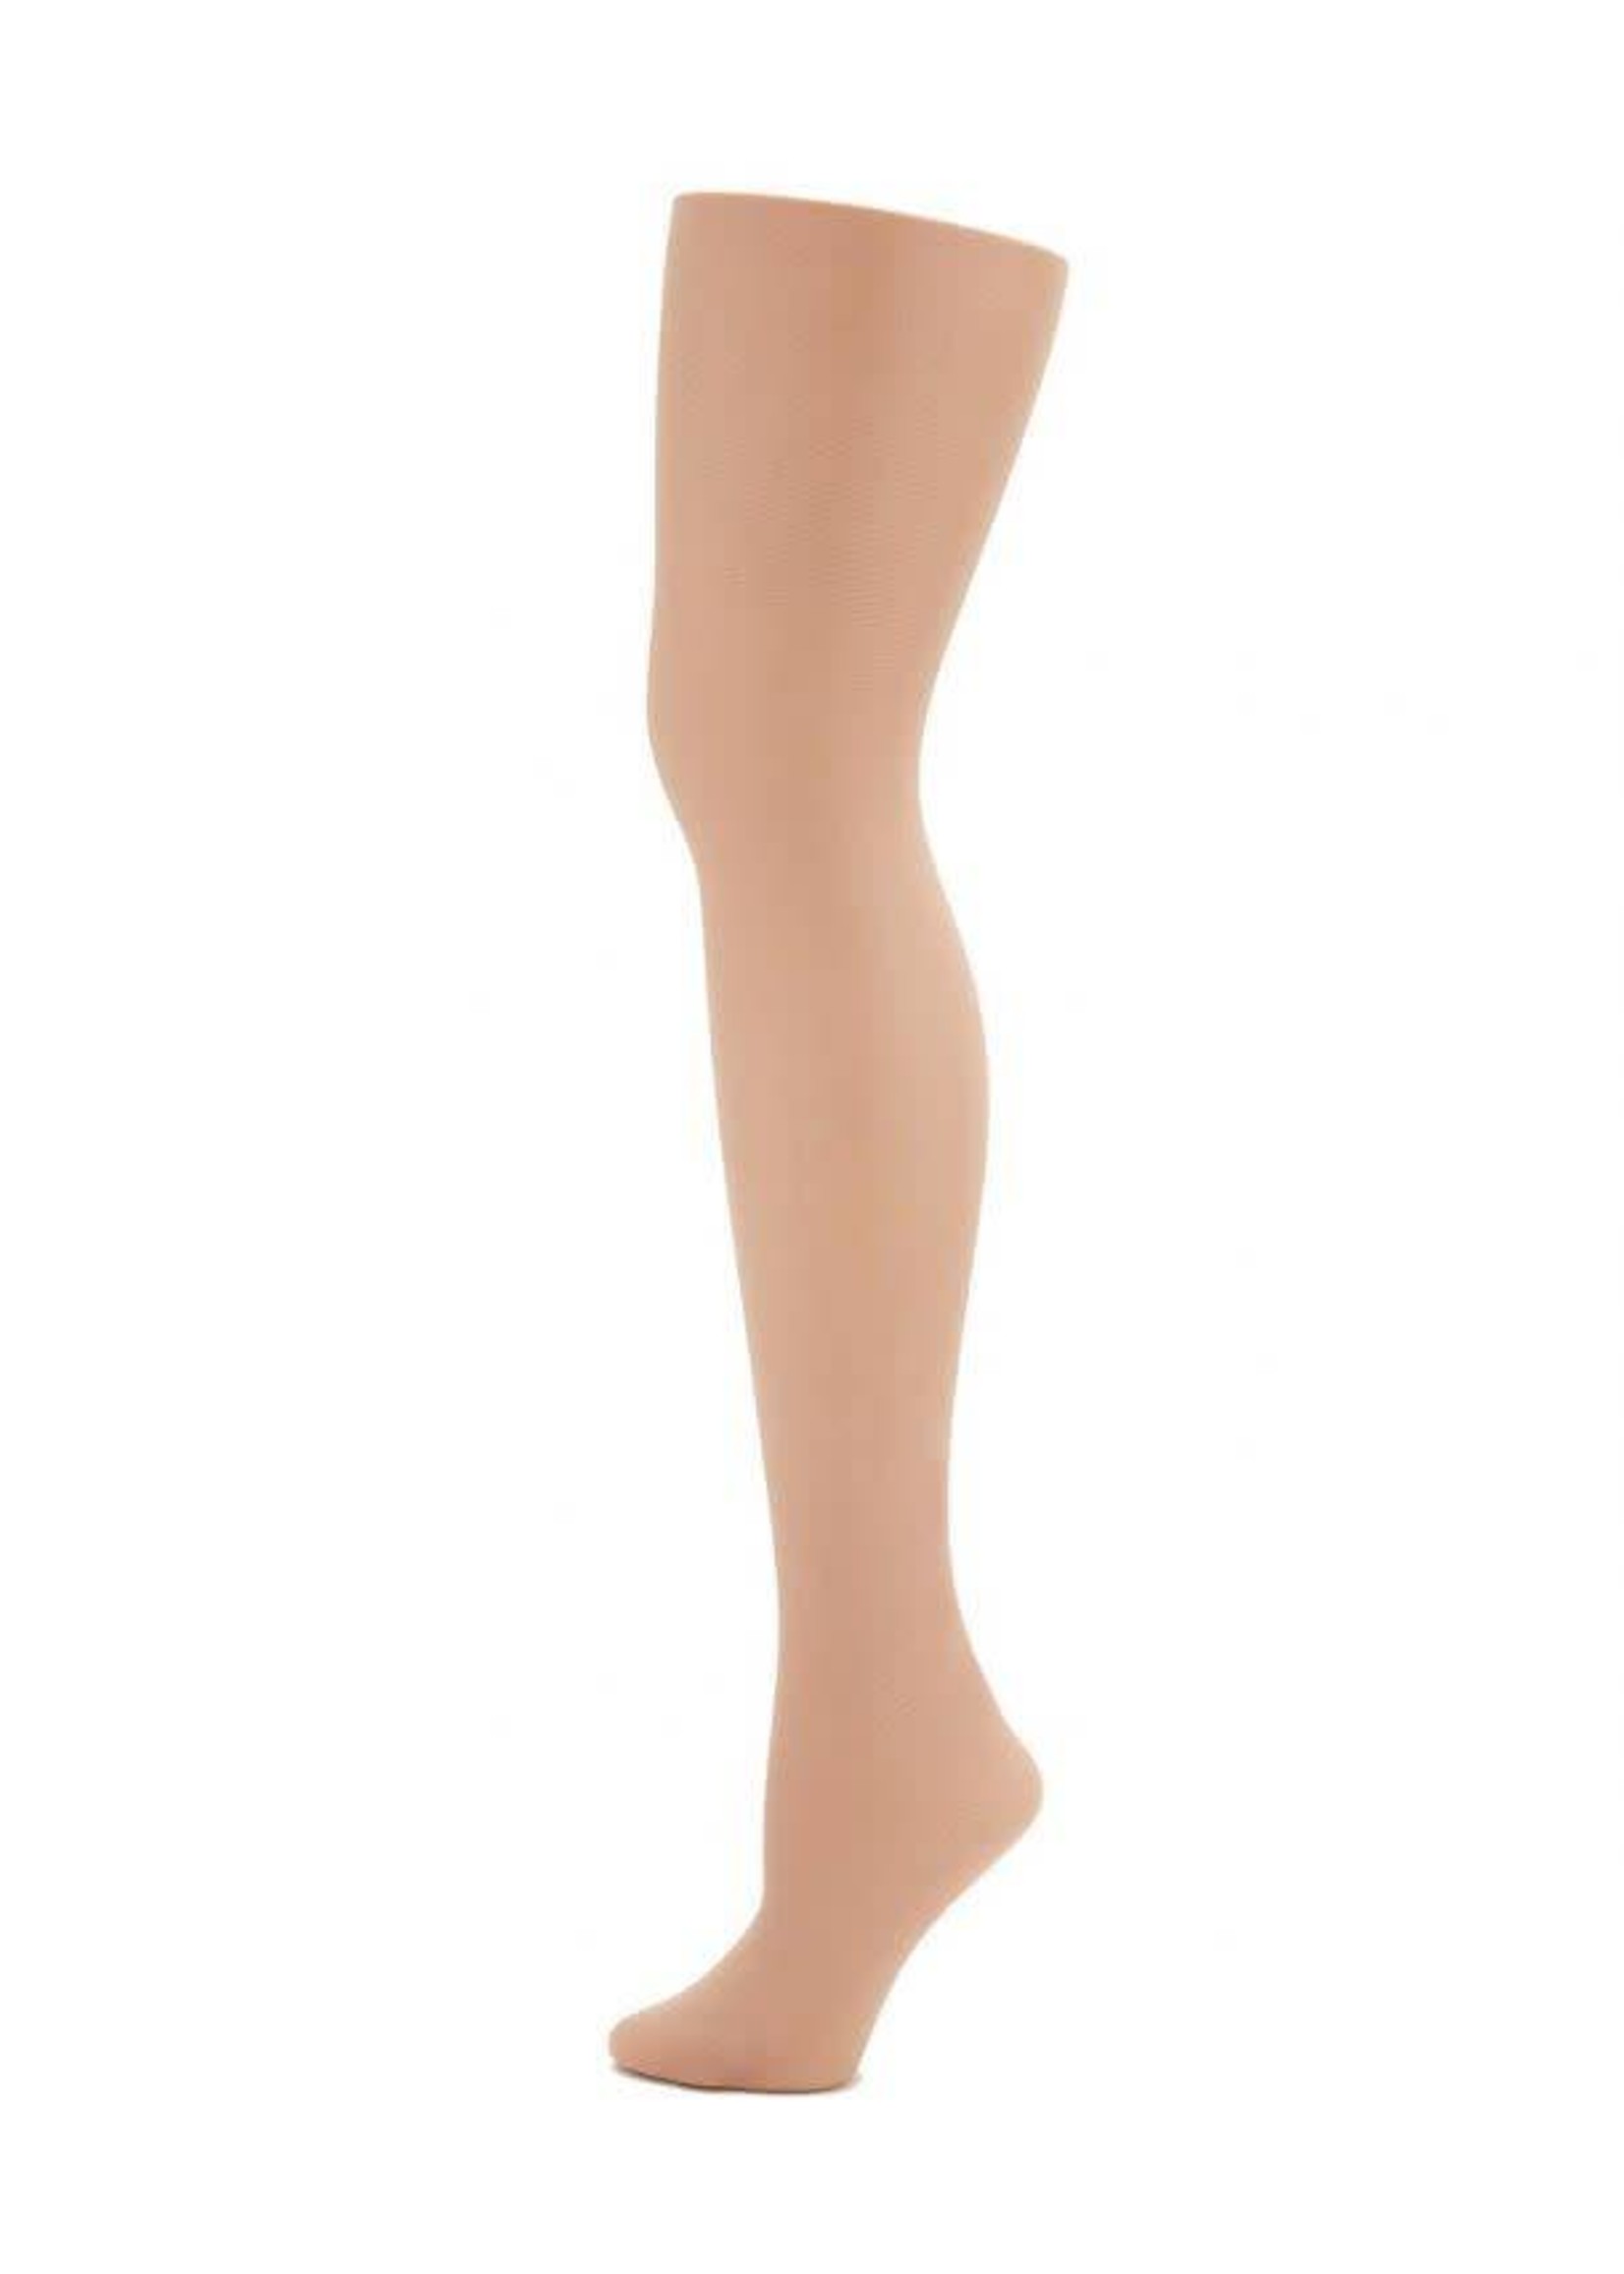 Capezio 1808 ULTRA SHIMMER FOOTED TIGHTS SUNTAN